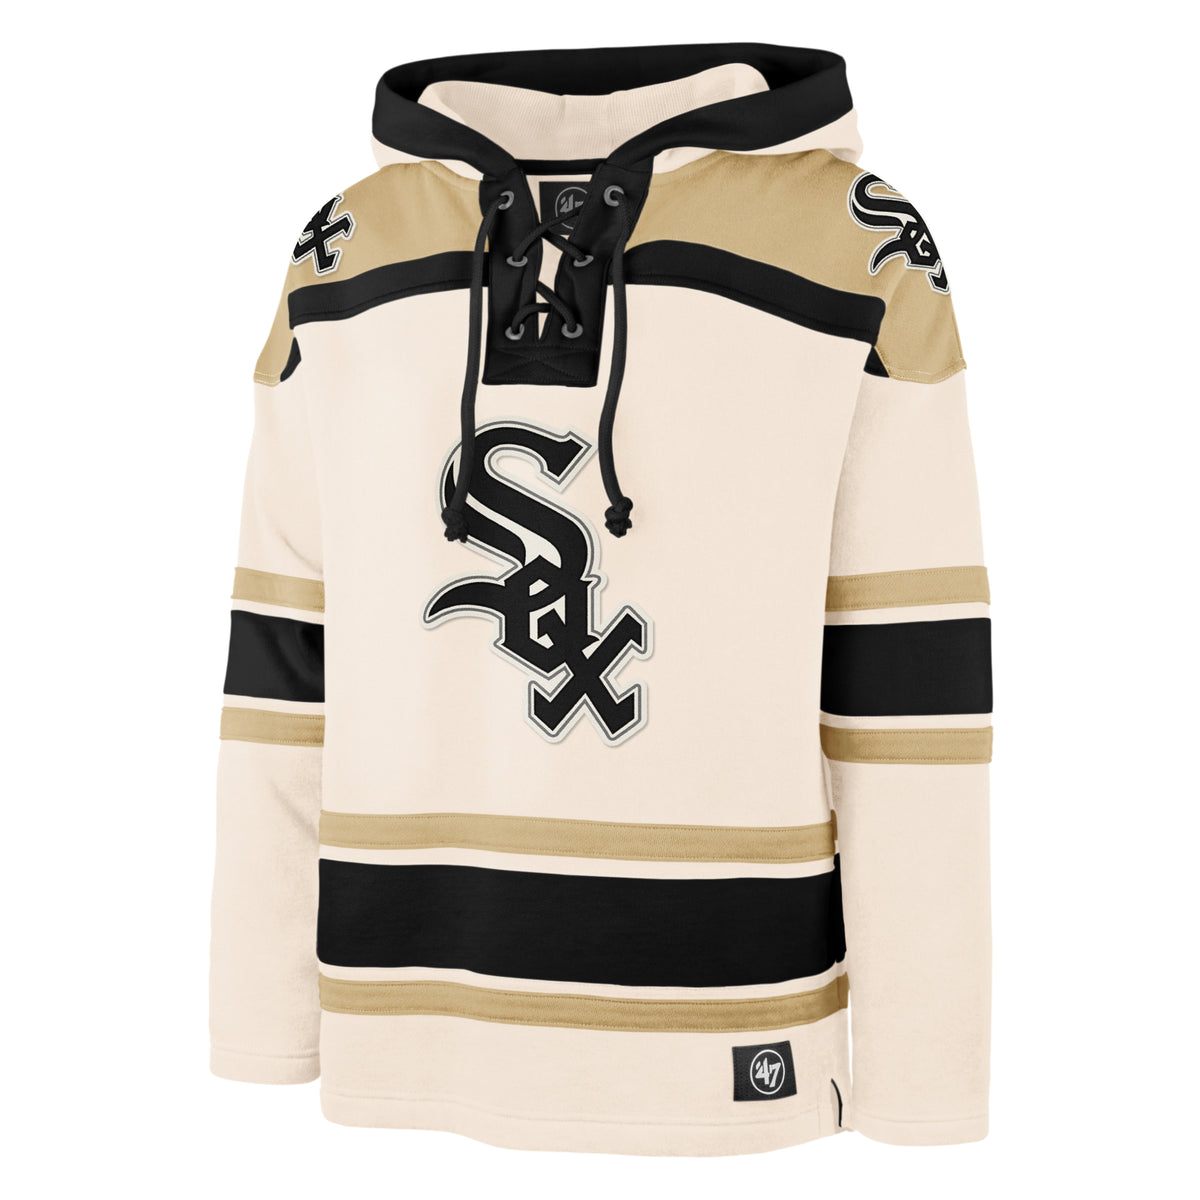 CHICAGO WHITE SOX SUPERIOR '47 LACER HOOD